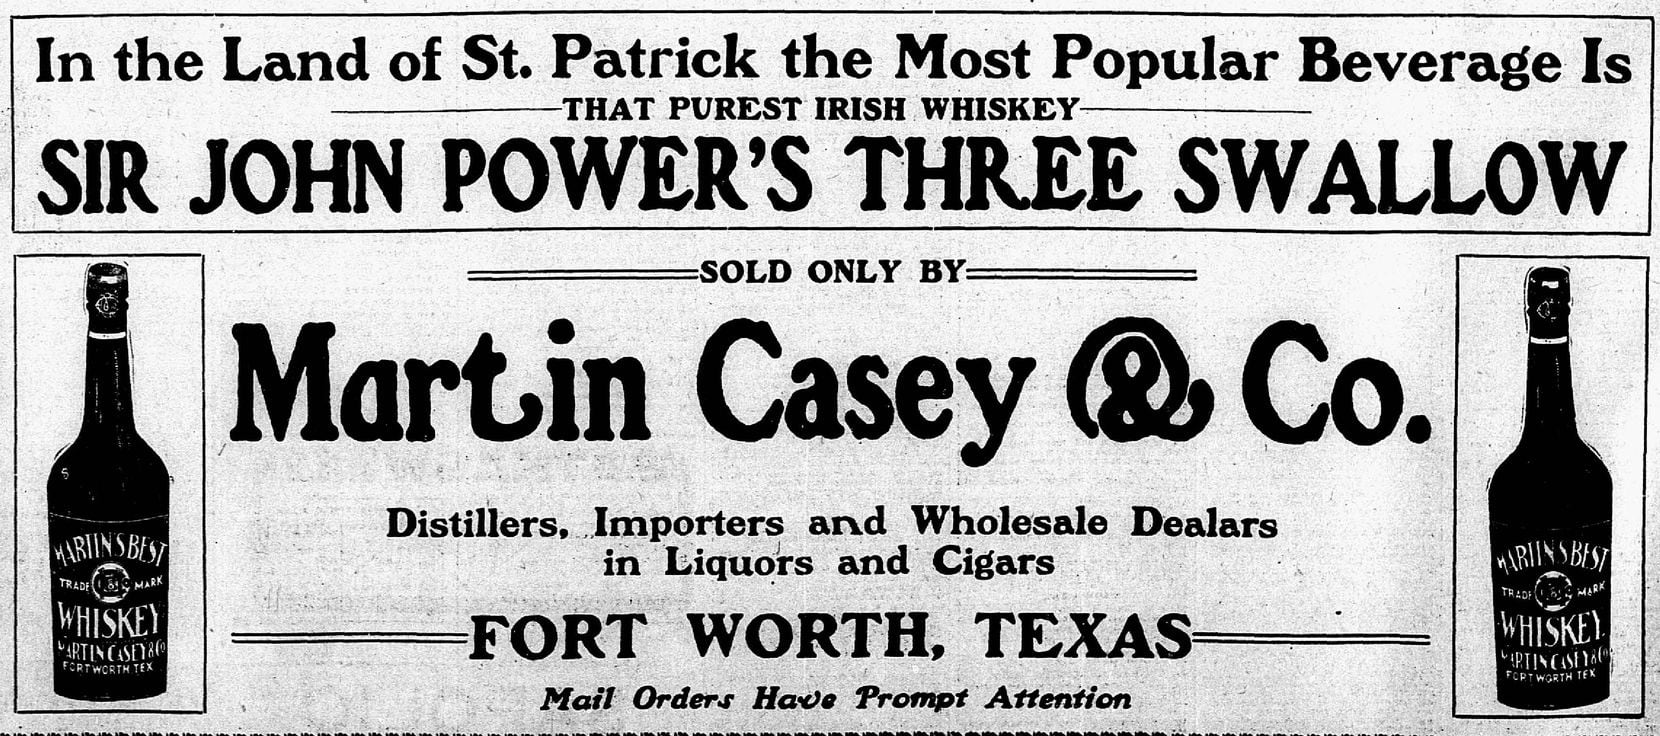 An ad that ran in the March 17, 1906, issue of The Dallas Morning News.